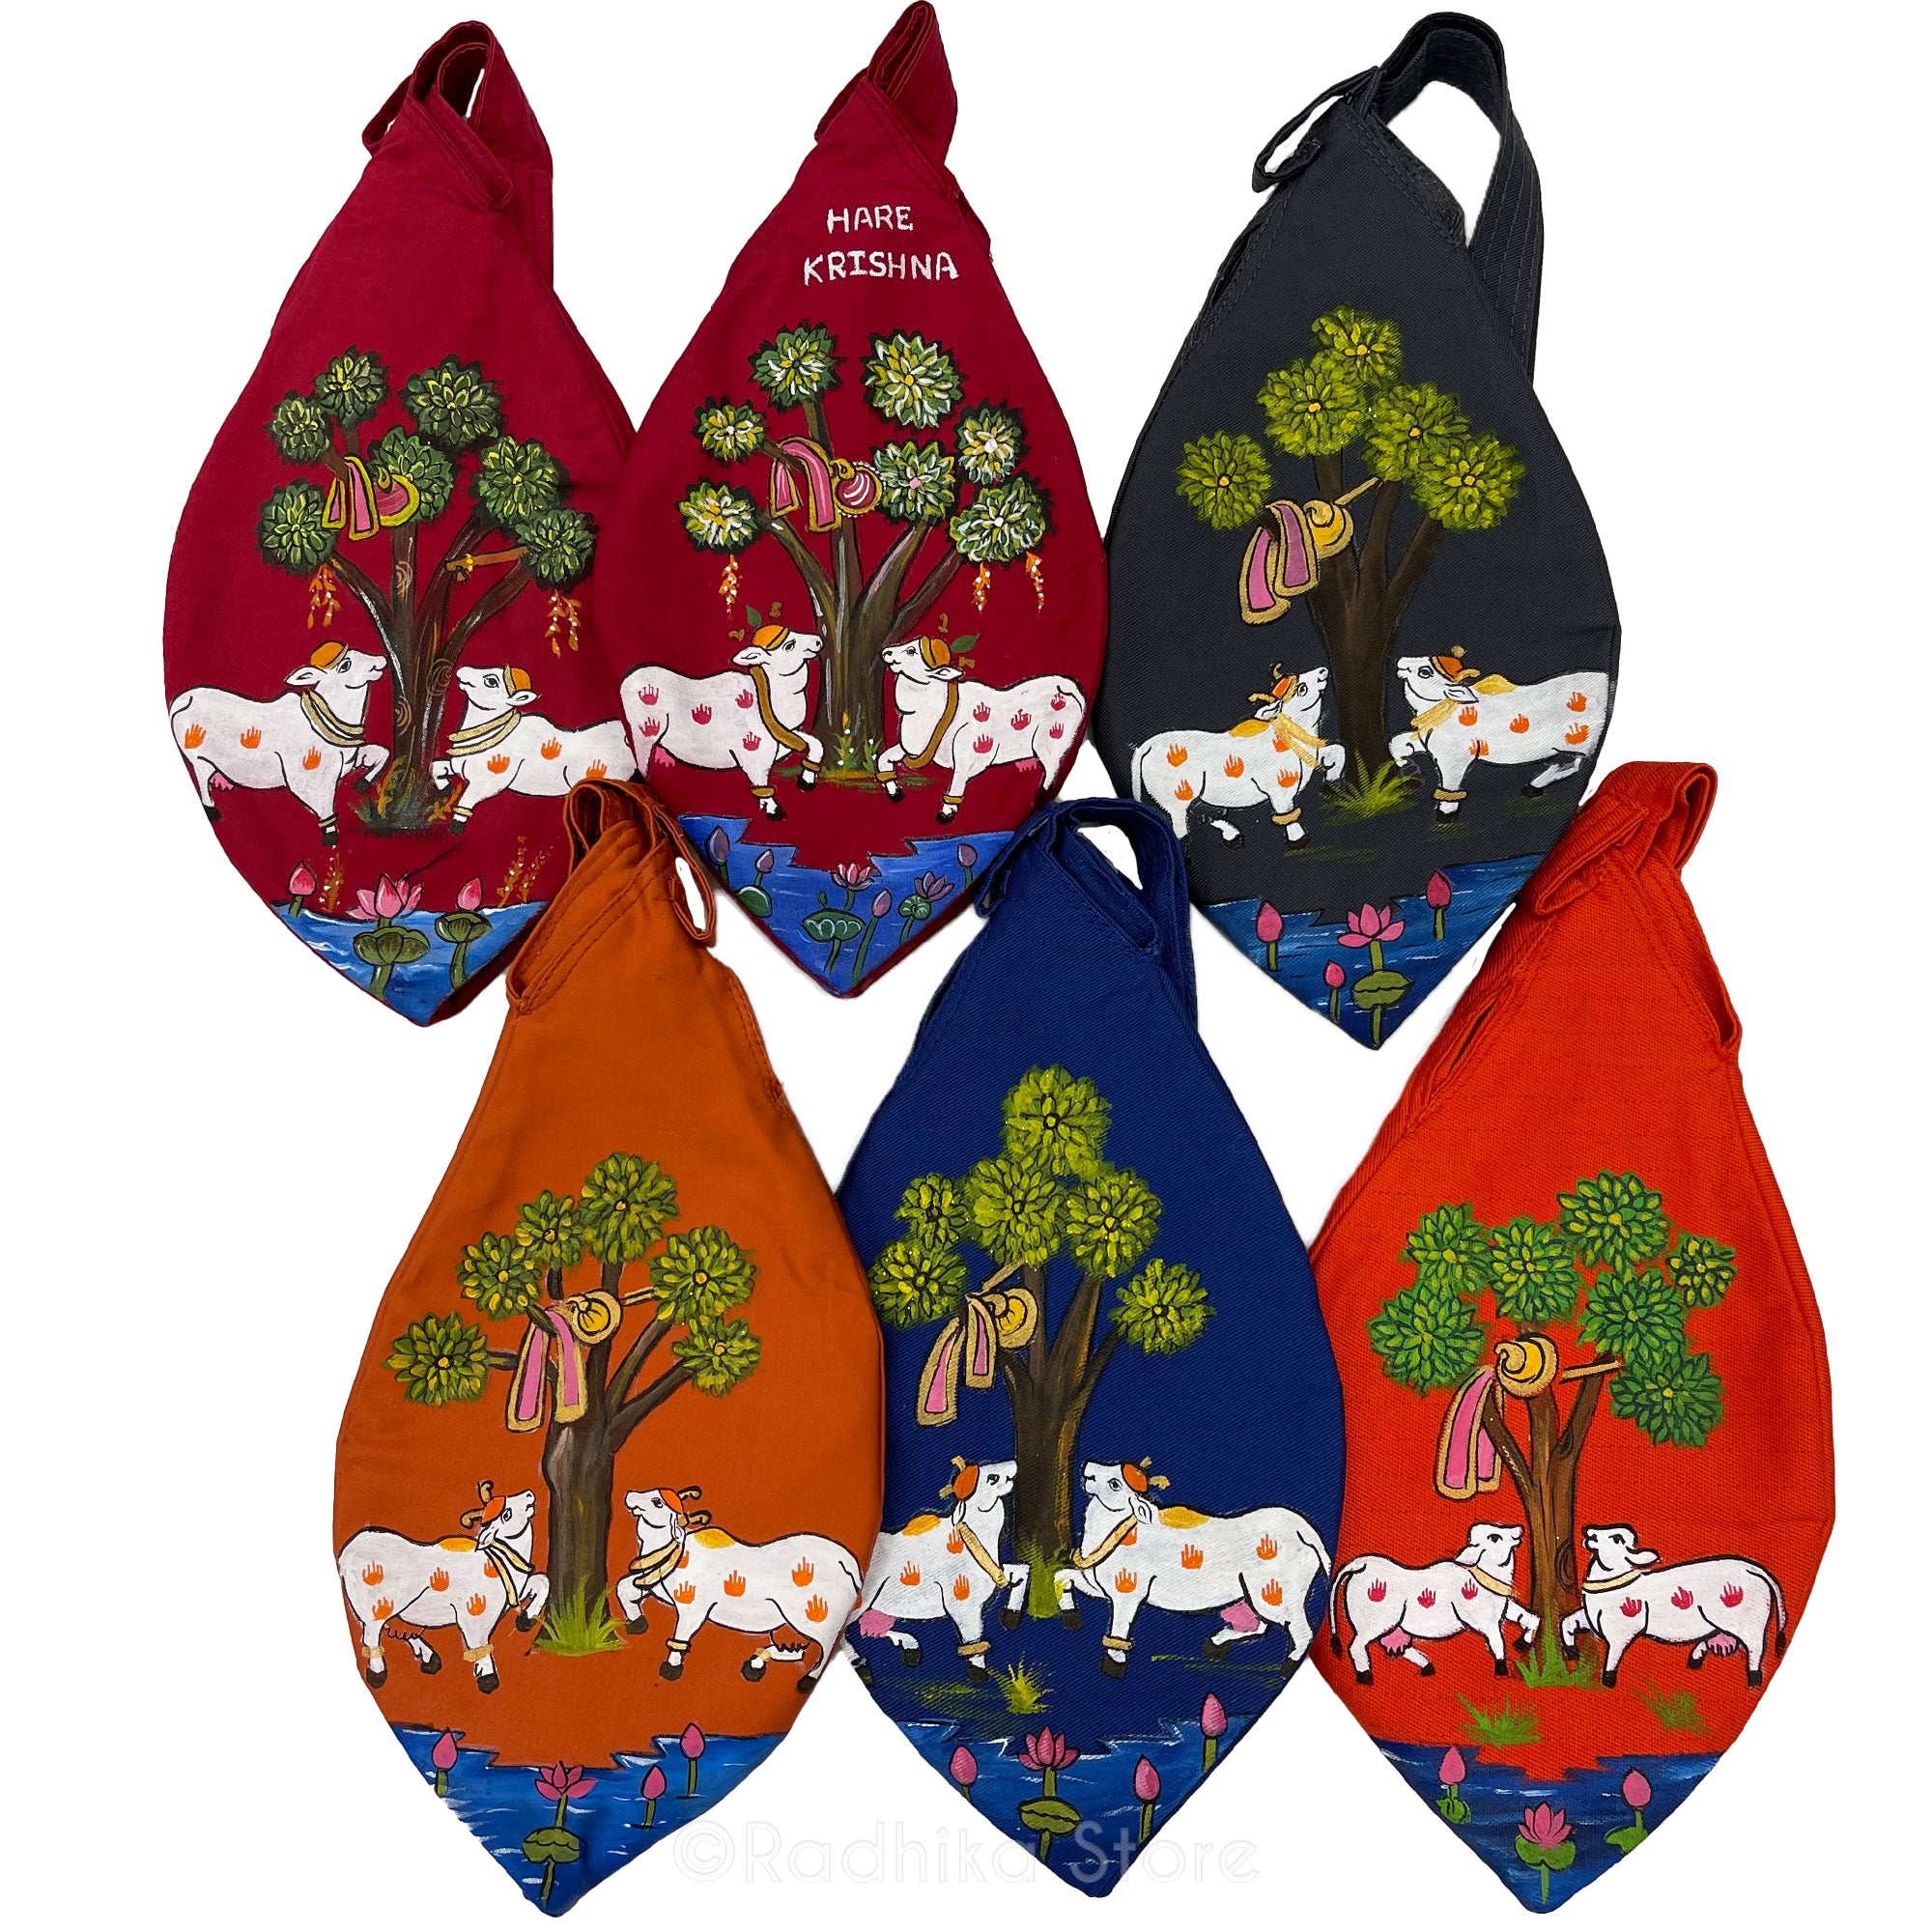 Vrindavan Cows - Thick Cotton - Hand Painted Bead Bag